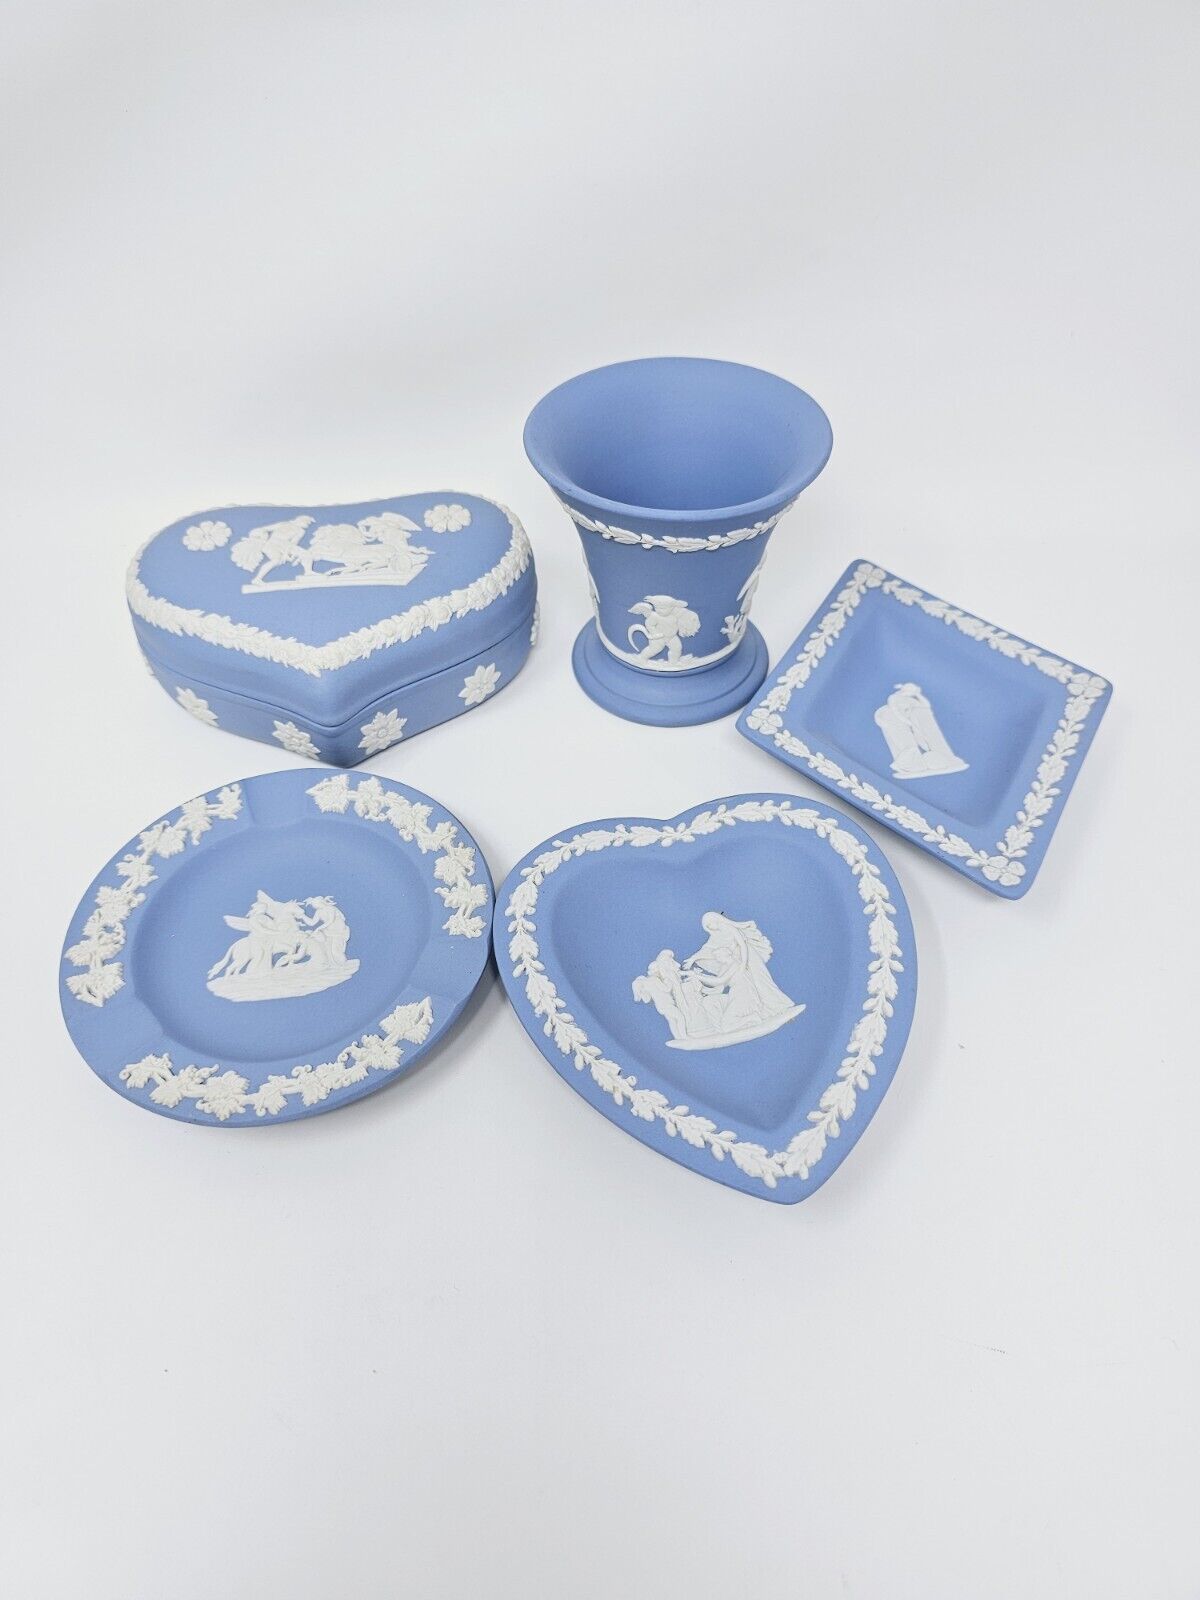 Lot of 5 Pieces of Wedgwood Blue Jasperware  Trinket Dishes & Cup